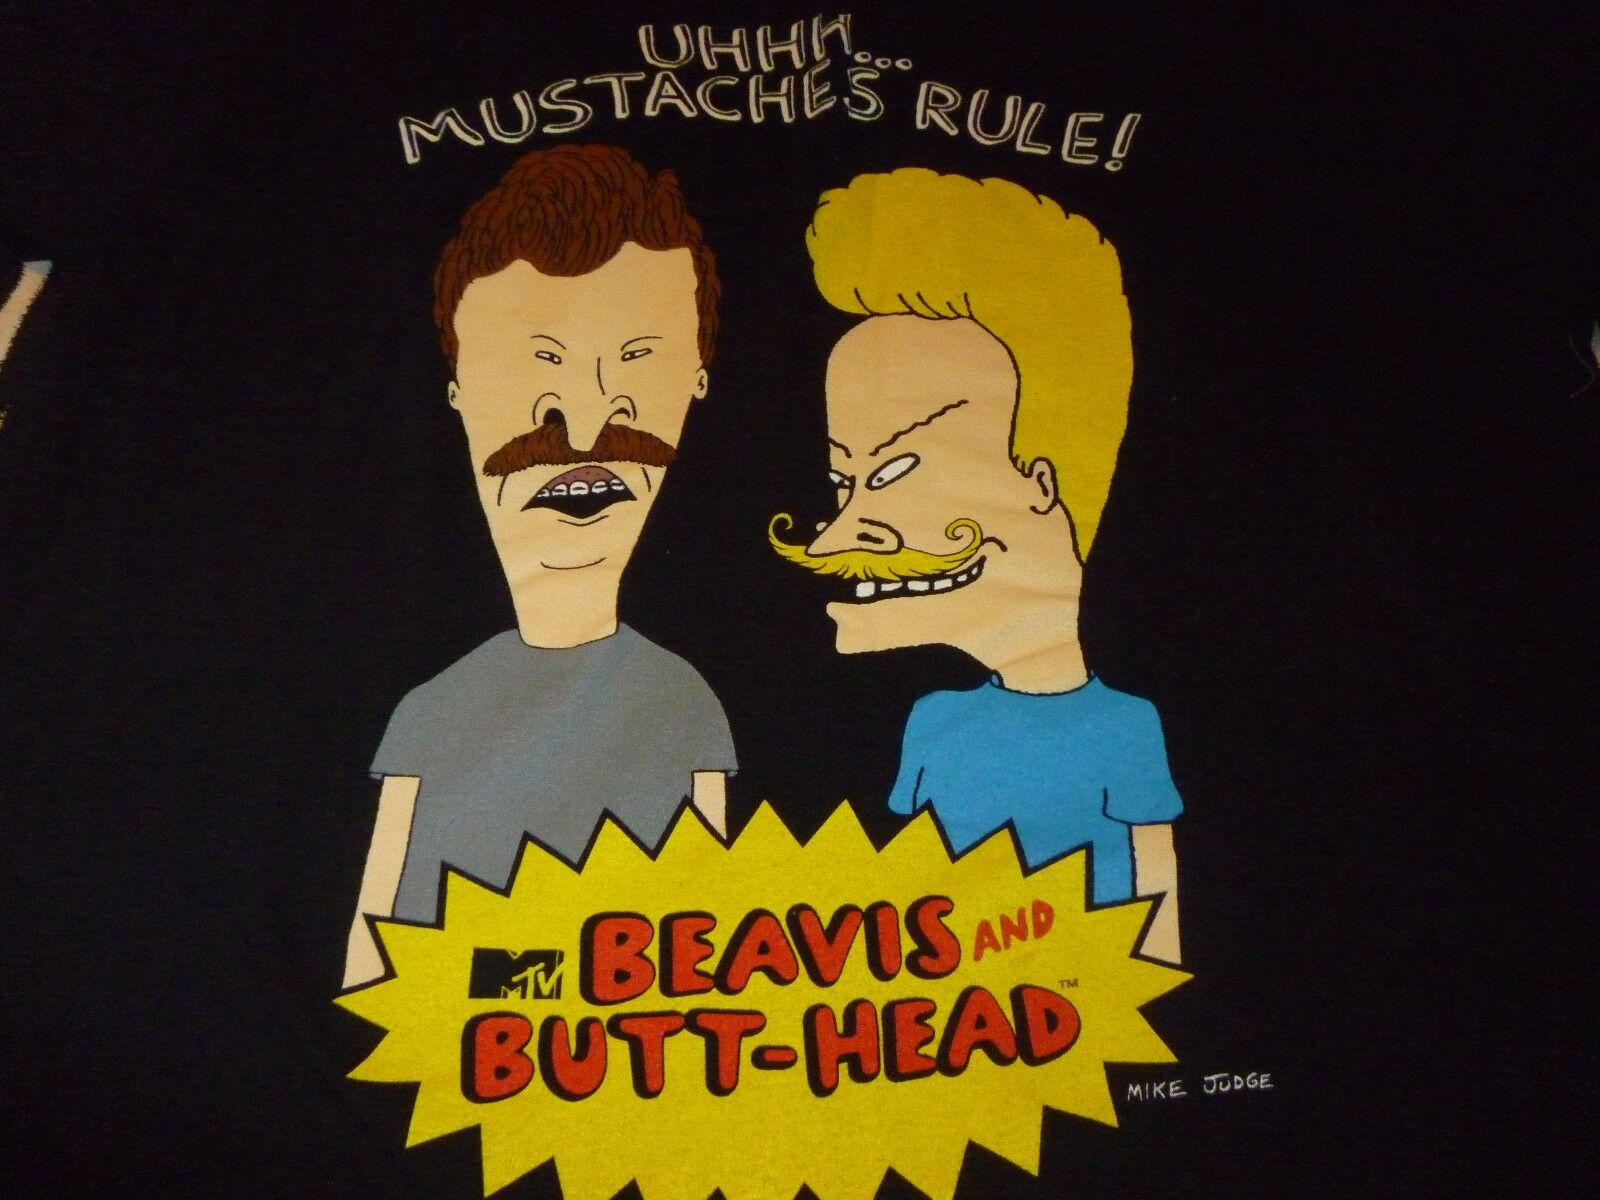 Beavis And Butthead Shirt ( Used Size L ) Very Nice Condition!!!